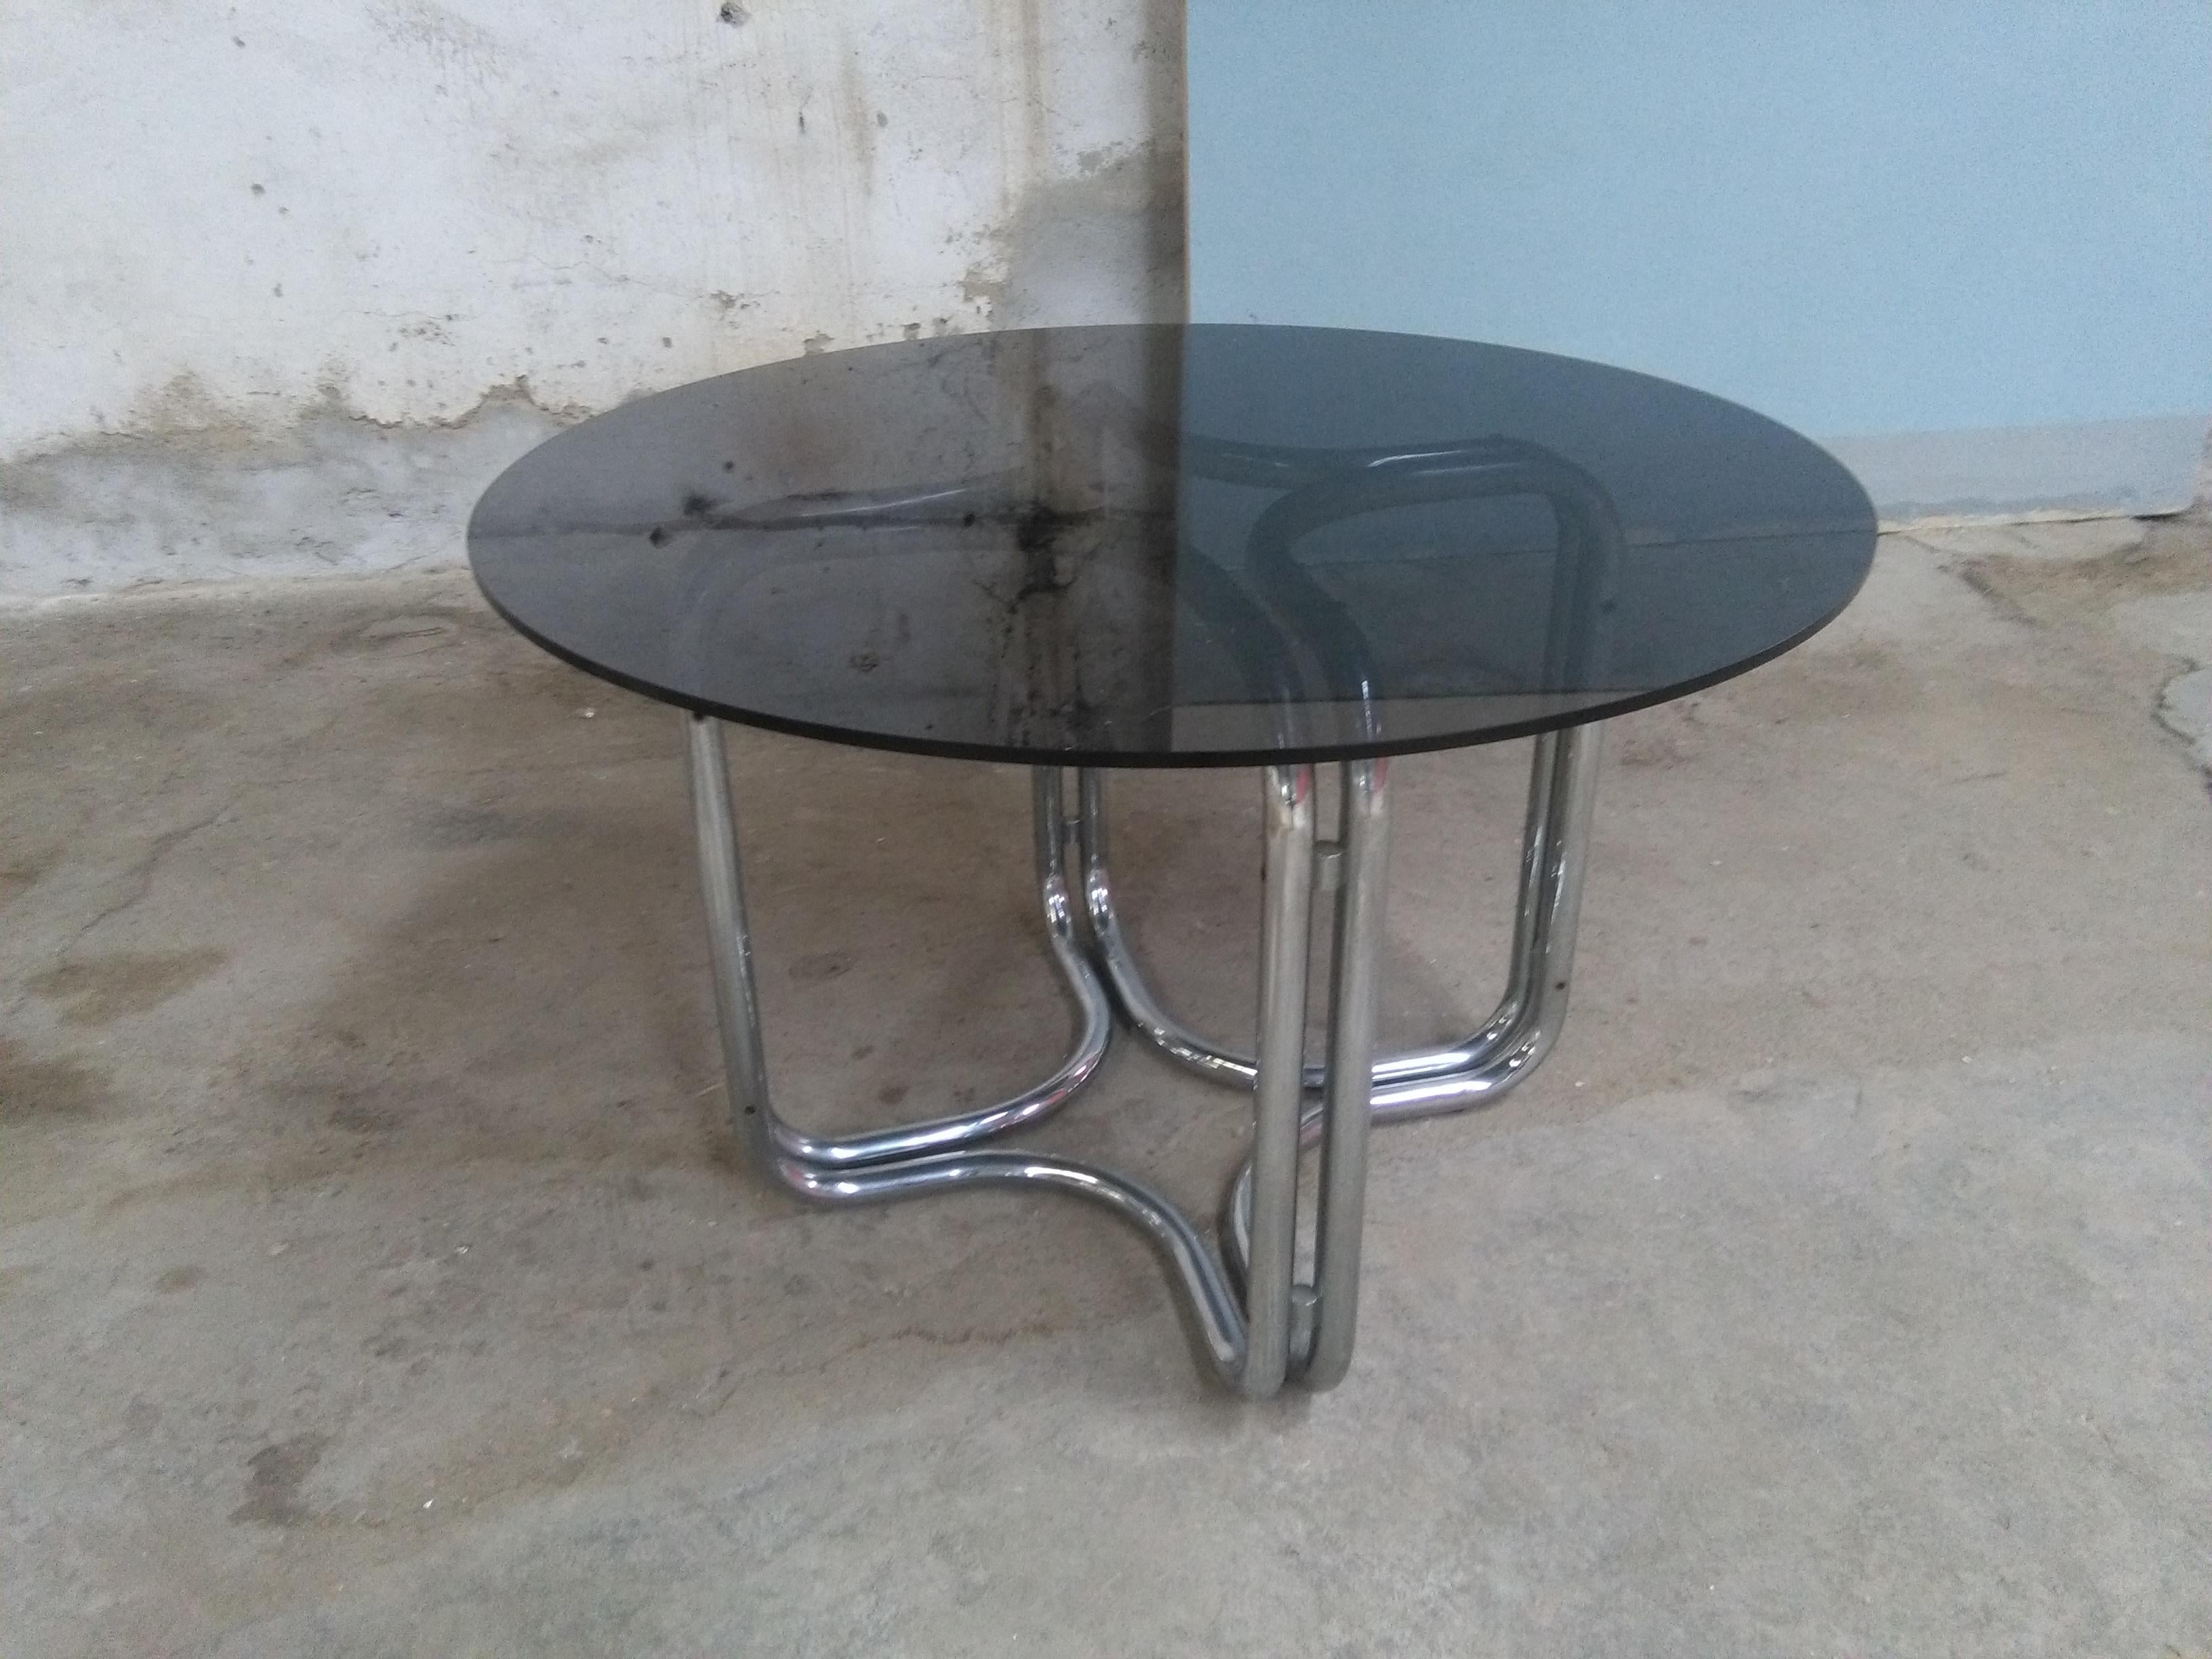 Mid-Century Modern Italian dining or centre table with smoked glass top and chrome base by Giotto Stoppino, 1970s
This table could be sold as a set with its four 